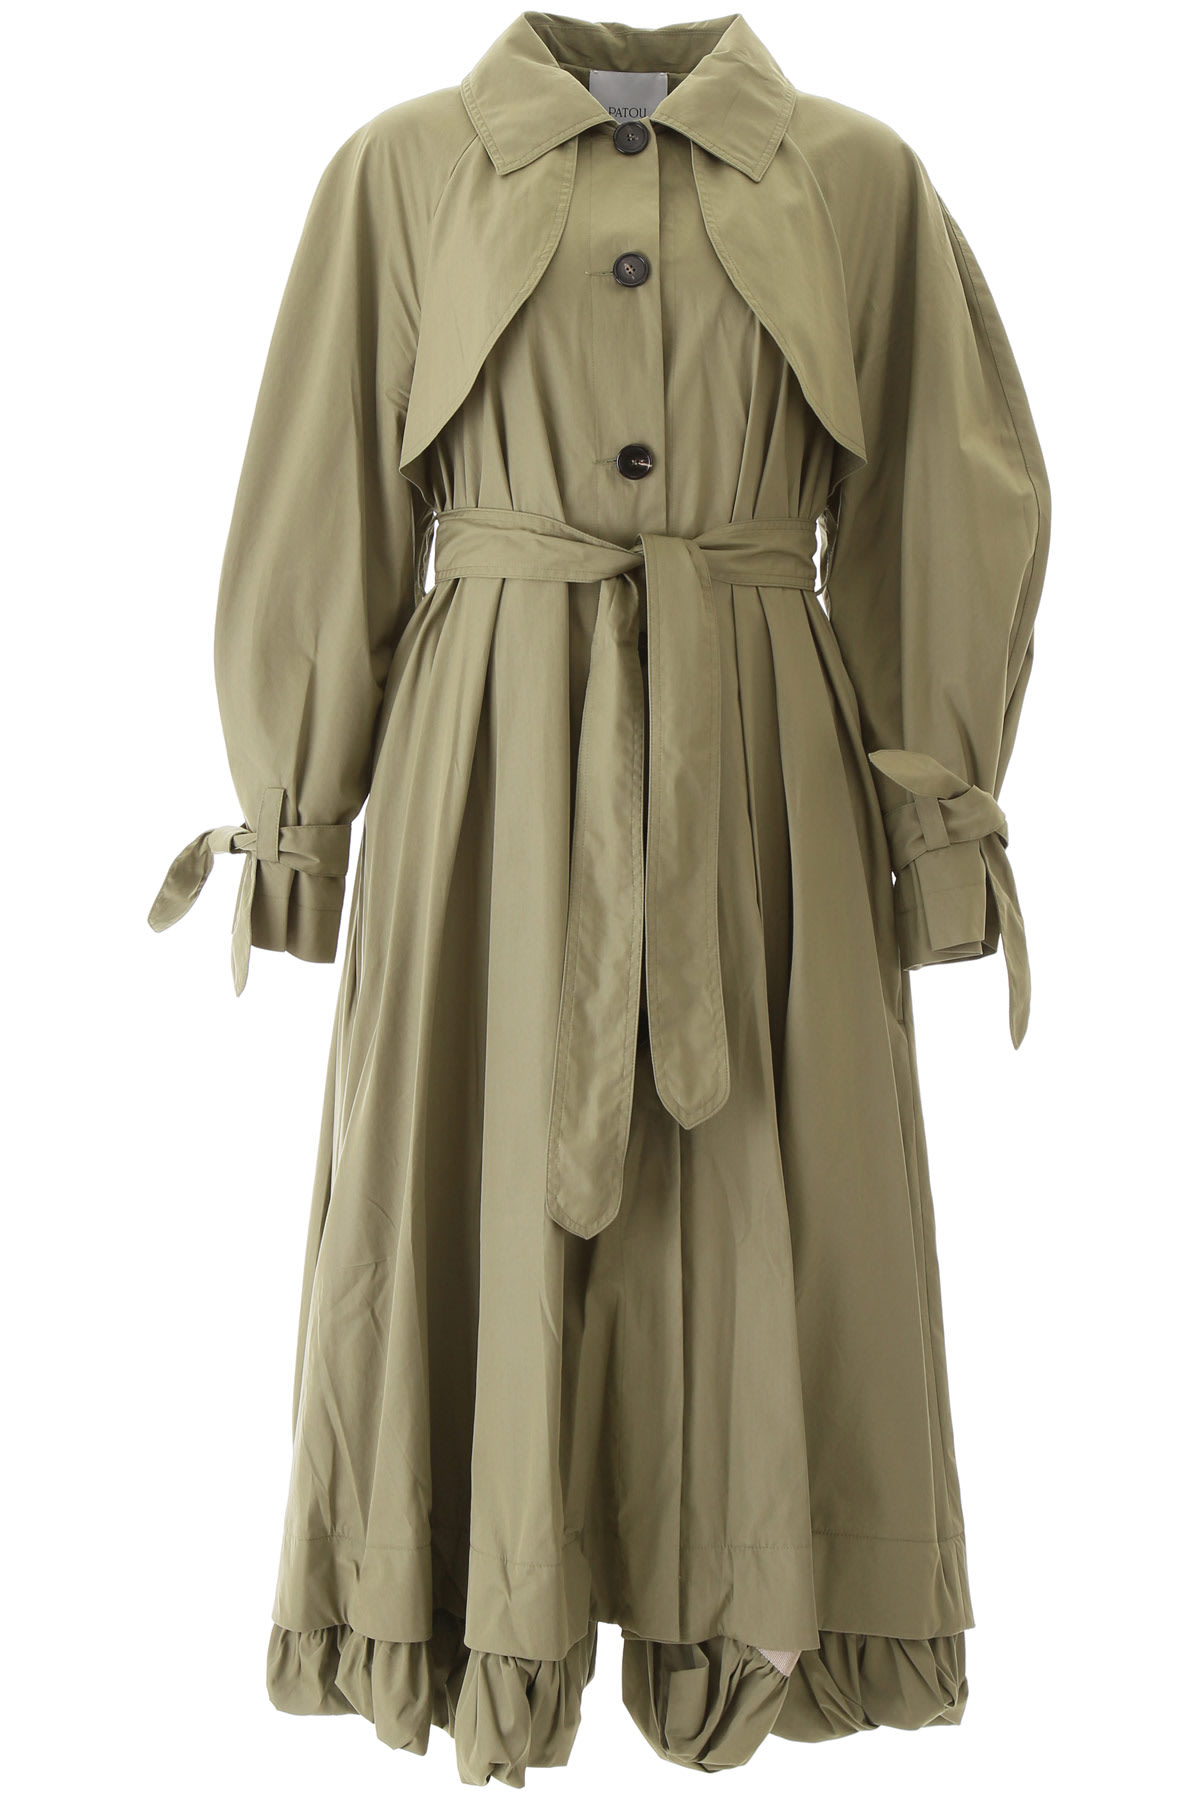 Patou Trench Coat